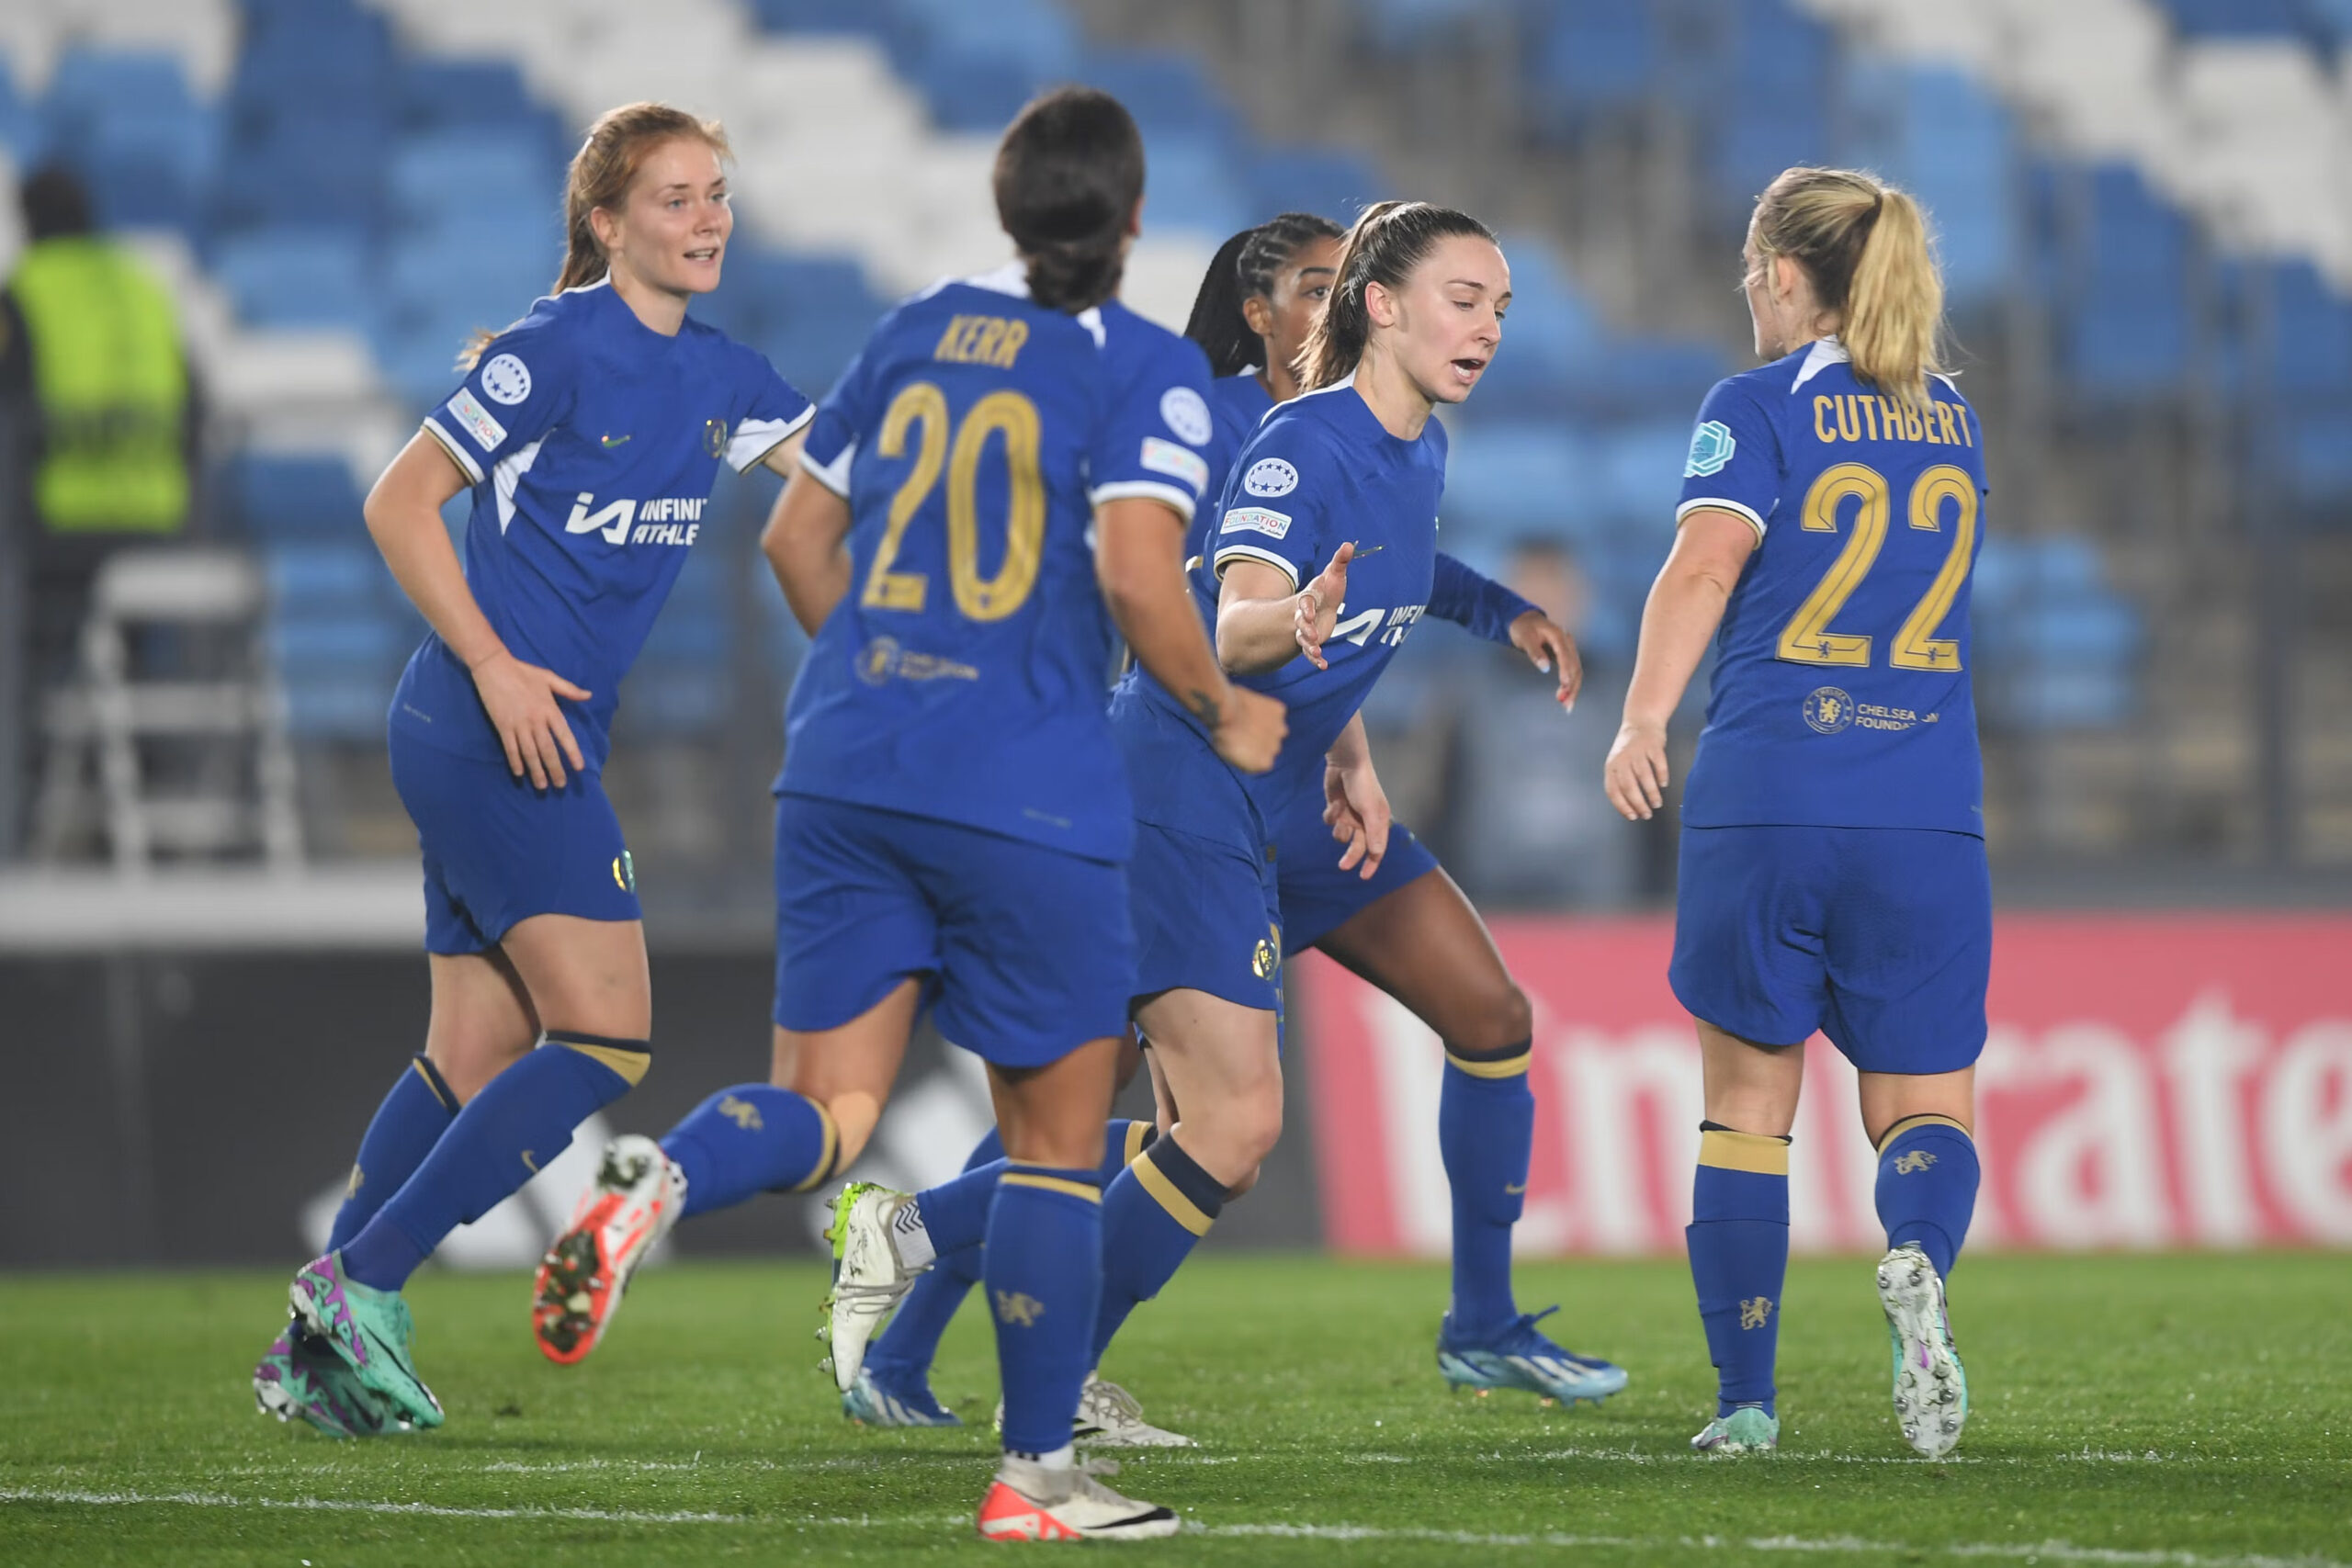 Chelsea was thwarted in their Women's Champions League opener as a controversial penalty call and disallowed goal allowed Real Madrid to draw with the Blues in Group D.